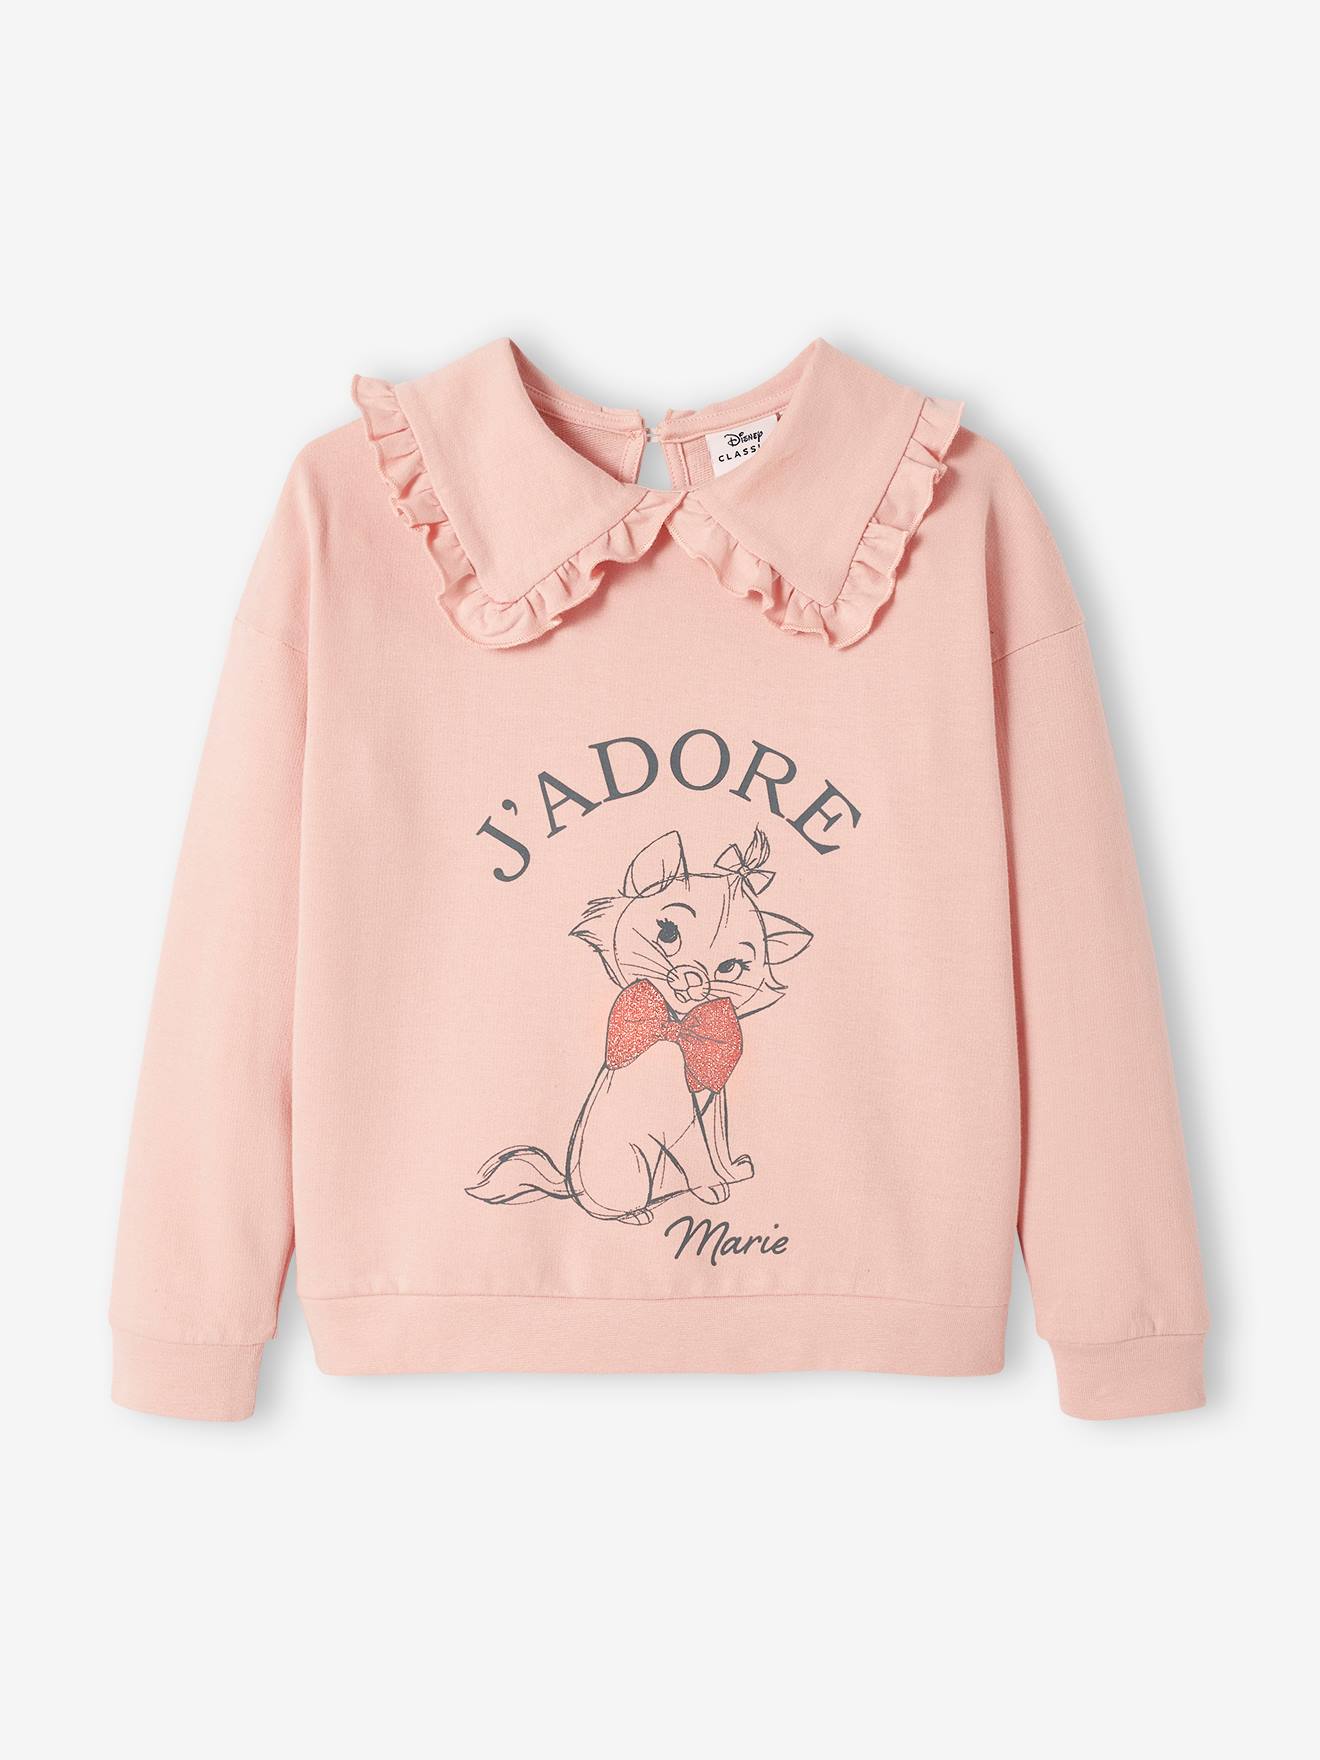 Marie Sweatshirt for Girls, Disney(r) The Aristocats old rose